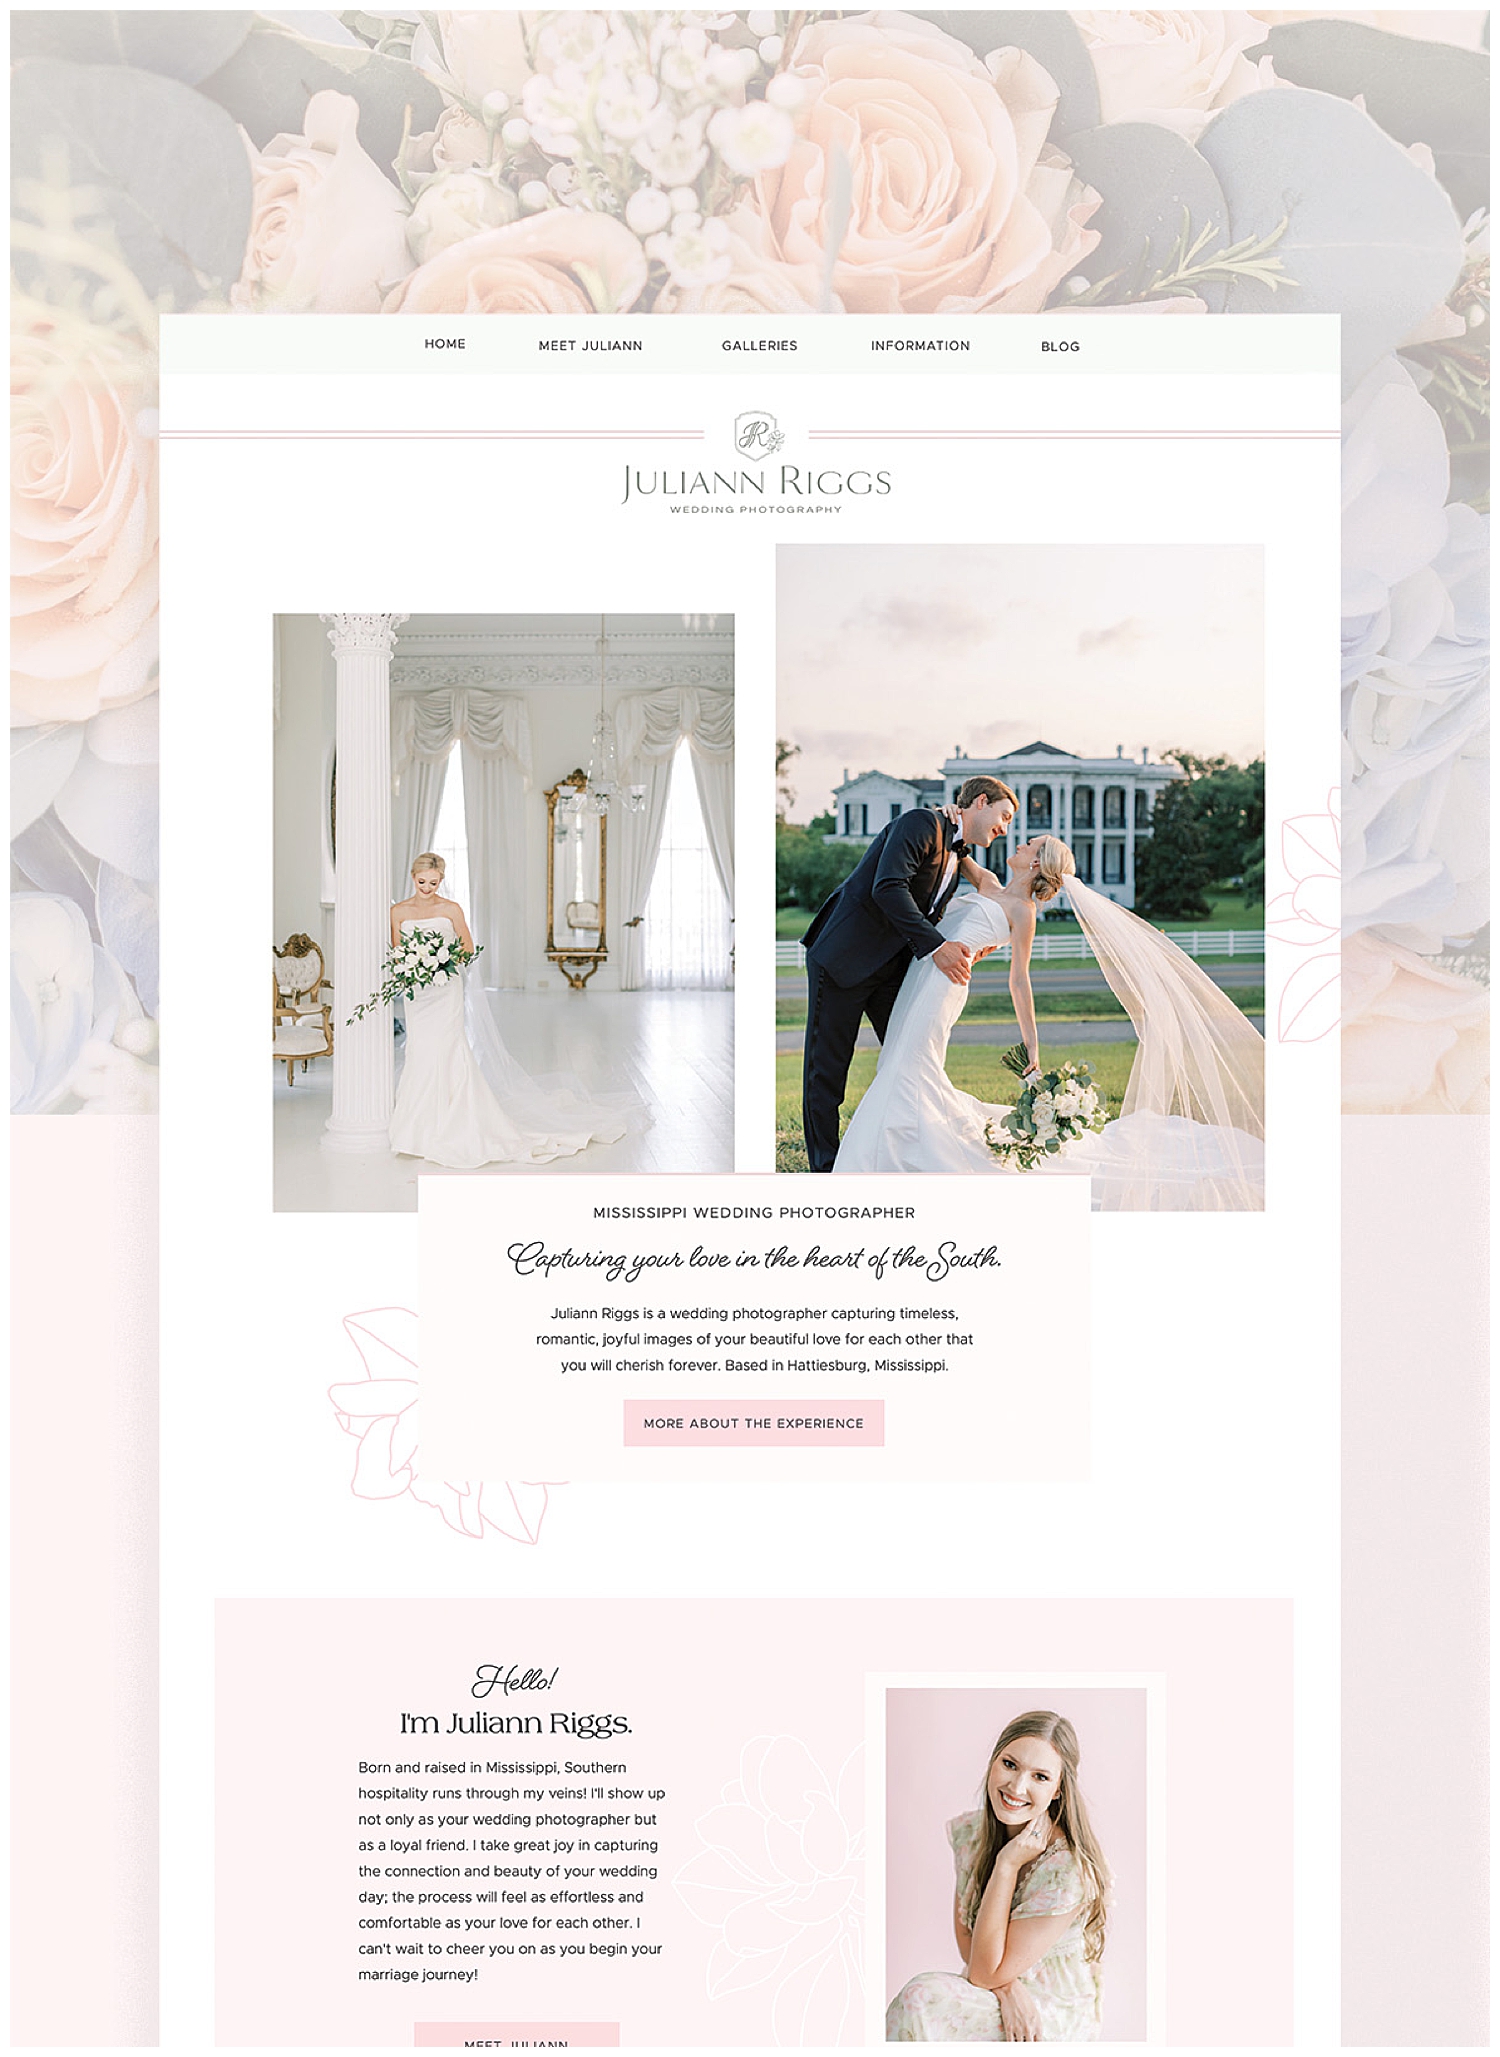 A Mississippi wedding photographer goes through a rebrand.